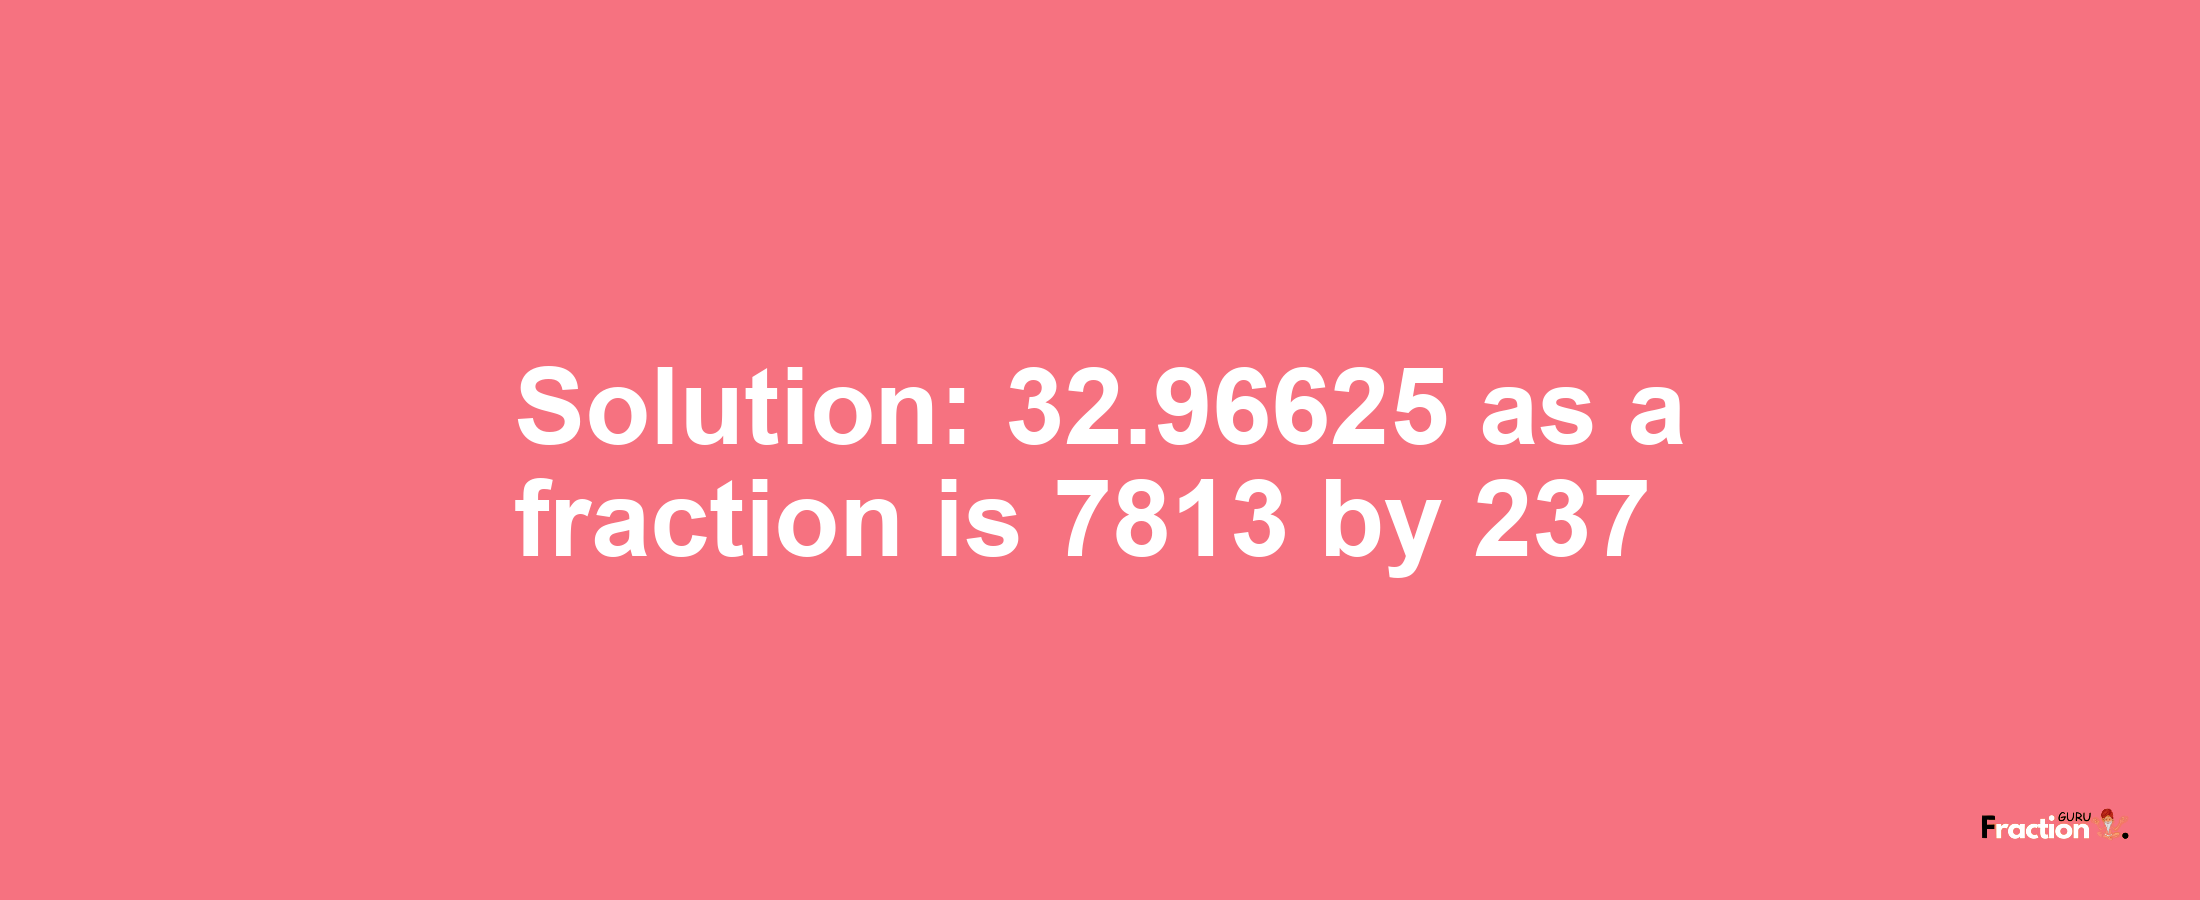 Solution:32.96625 as a fraction is 7813/237